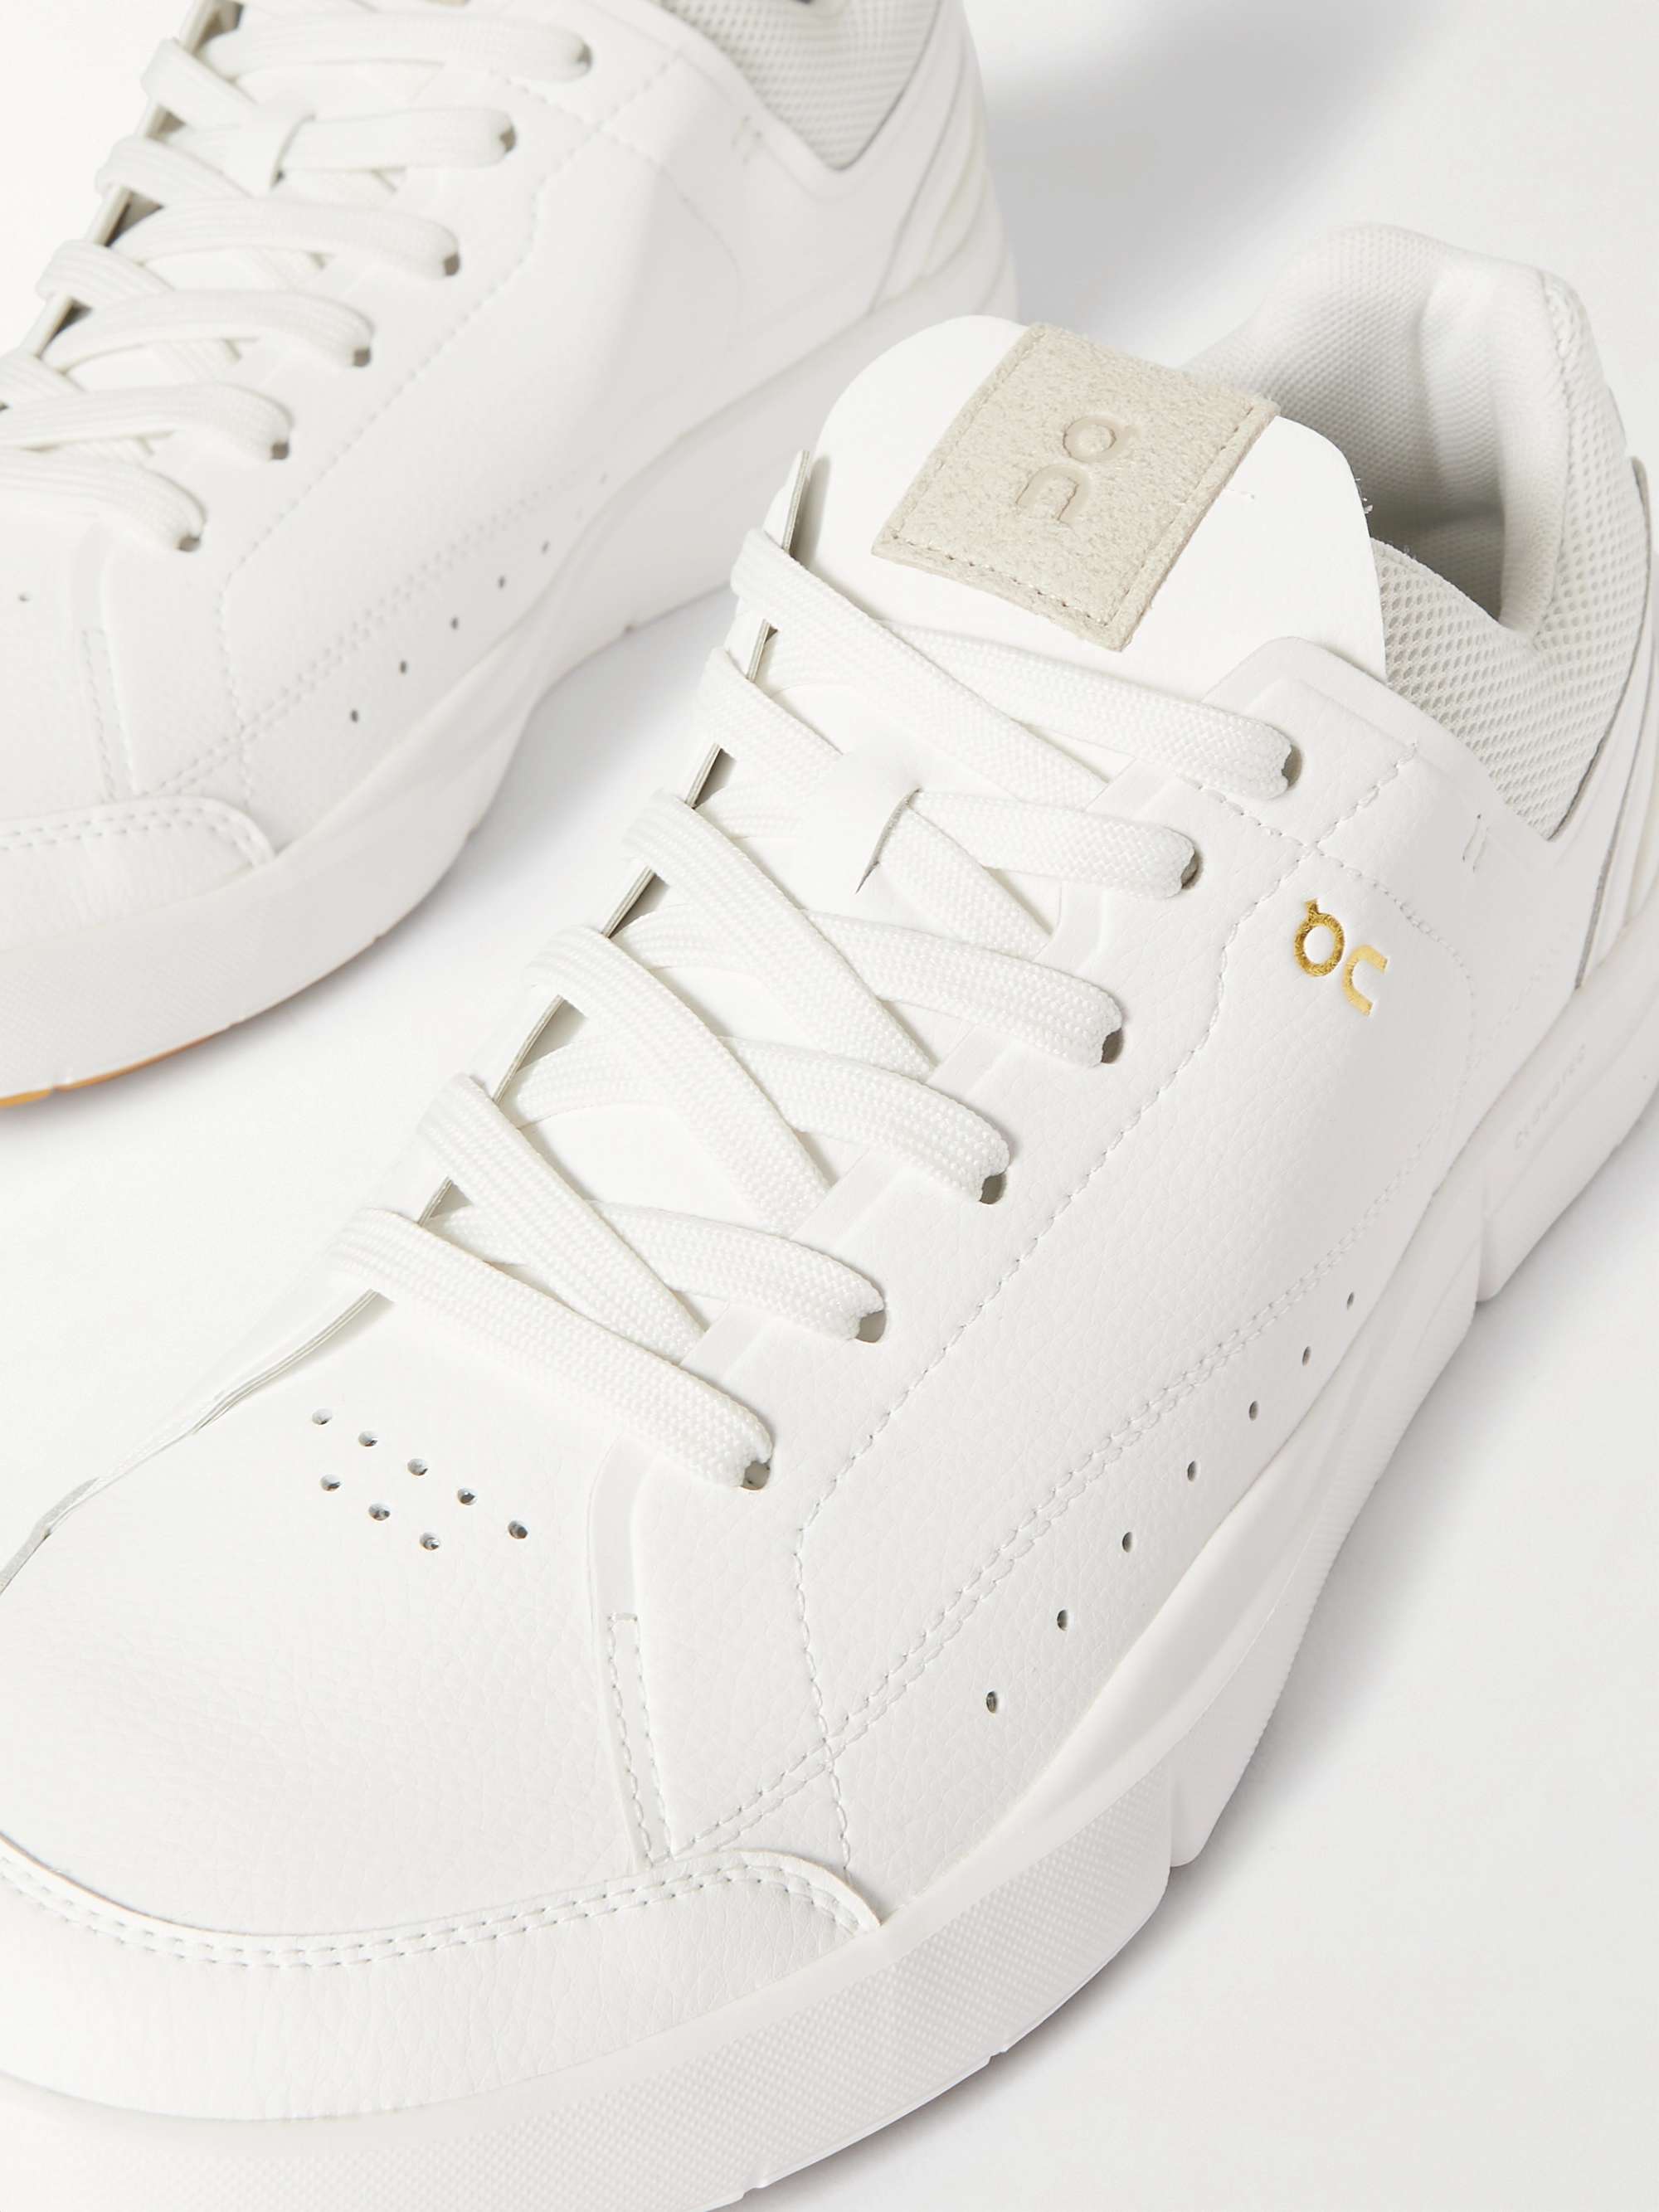 ON + Roger Federer The Roger Centre Court Vegan Leather and Mesh Tennis Sneakers